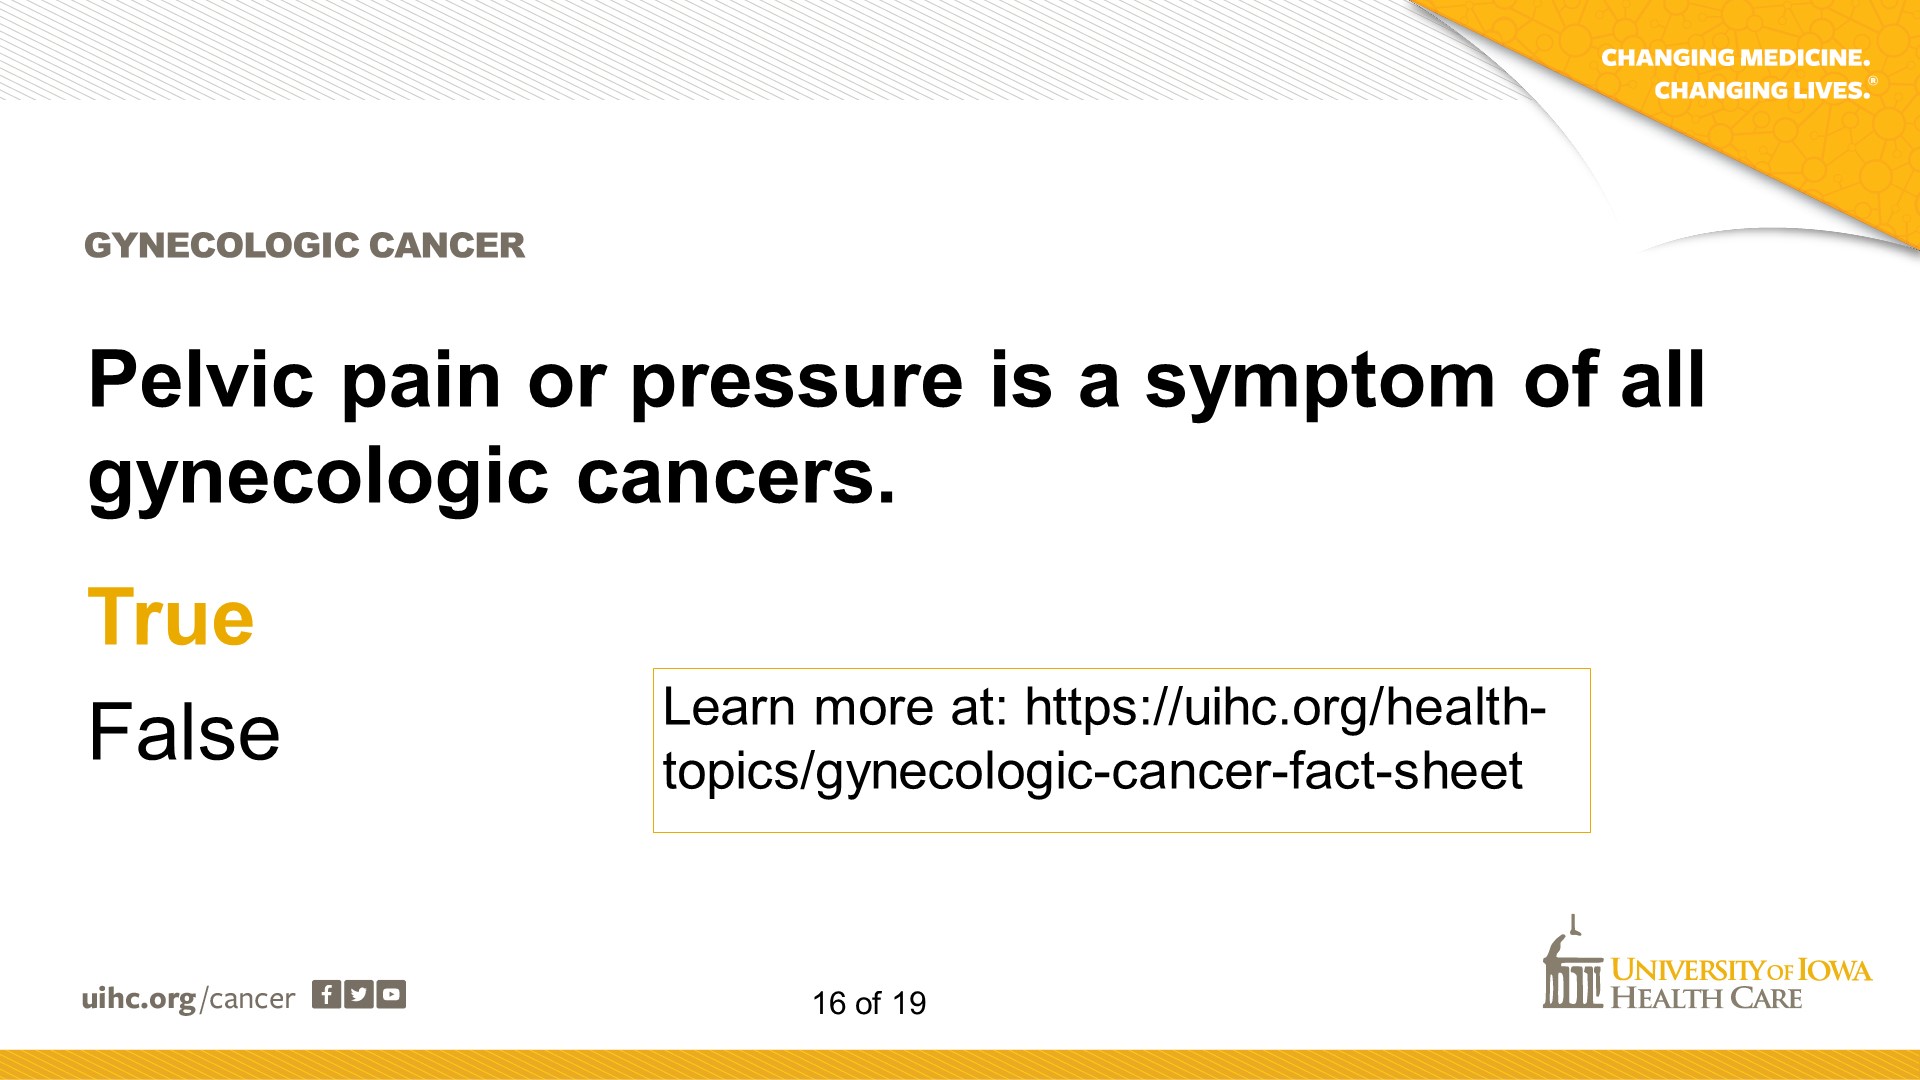 True - to learn more visit uihc.org/health-topics/gynecologic-cancer-fact-sheet